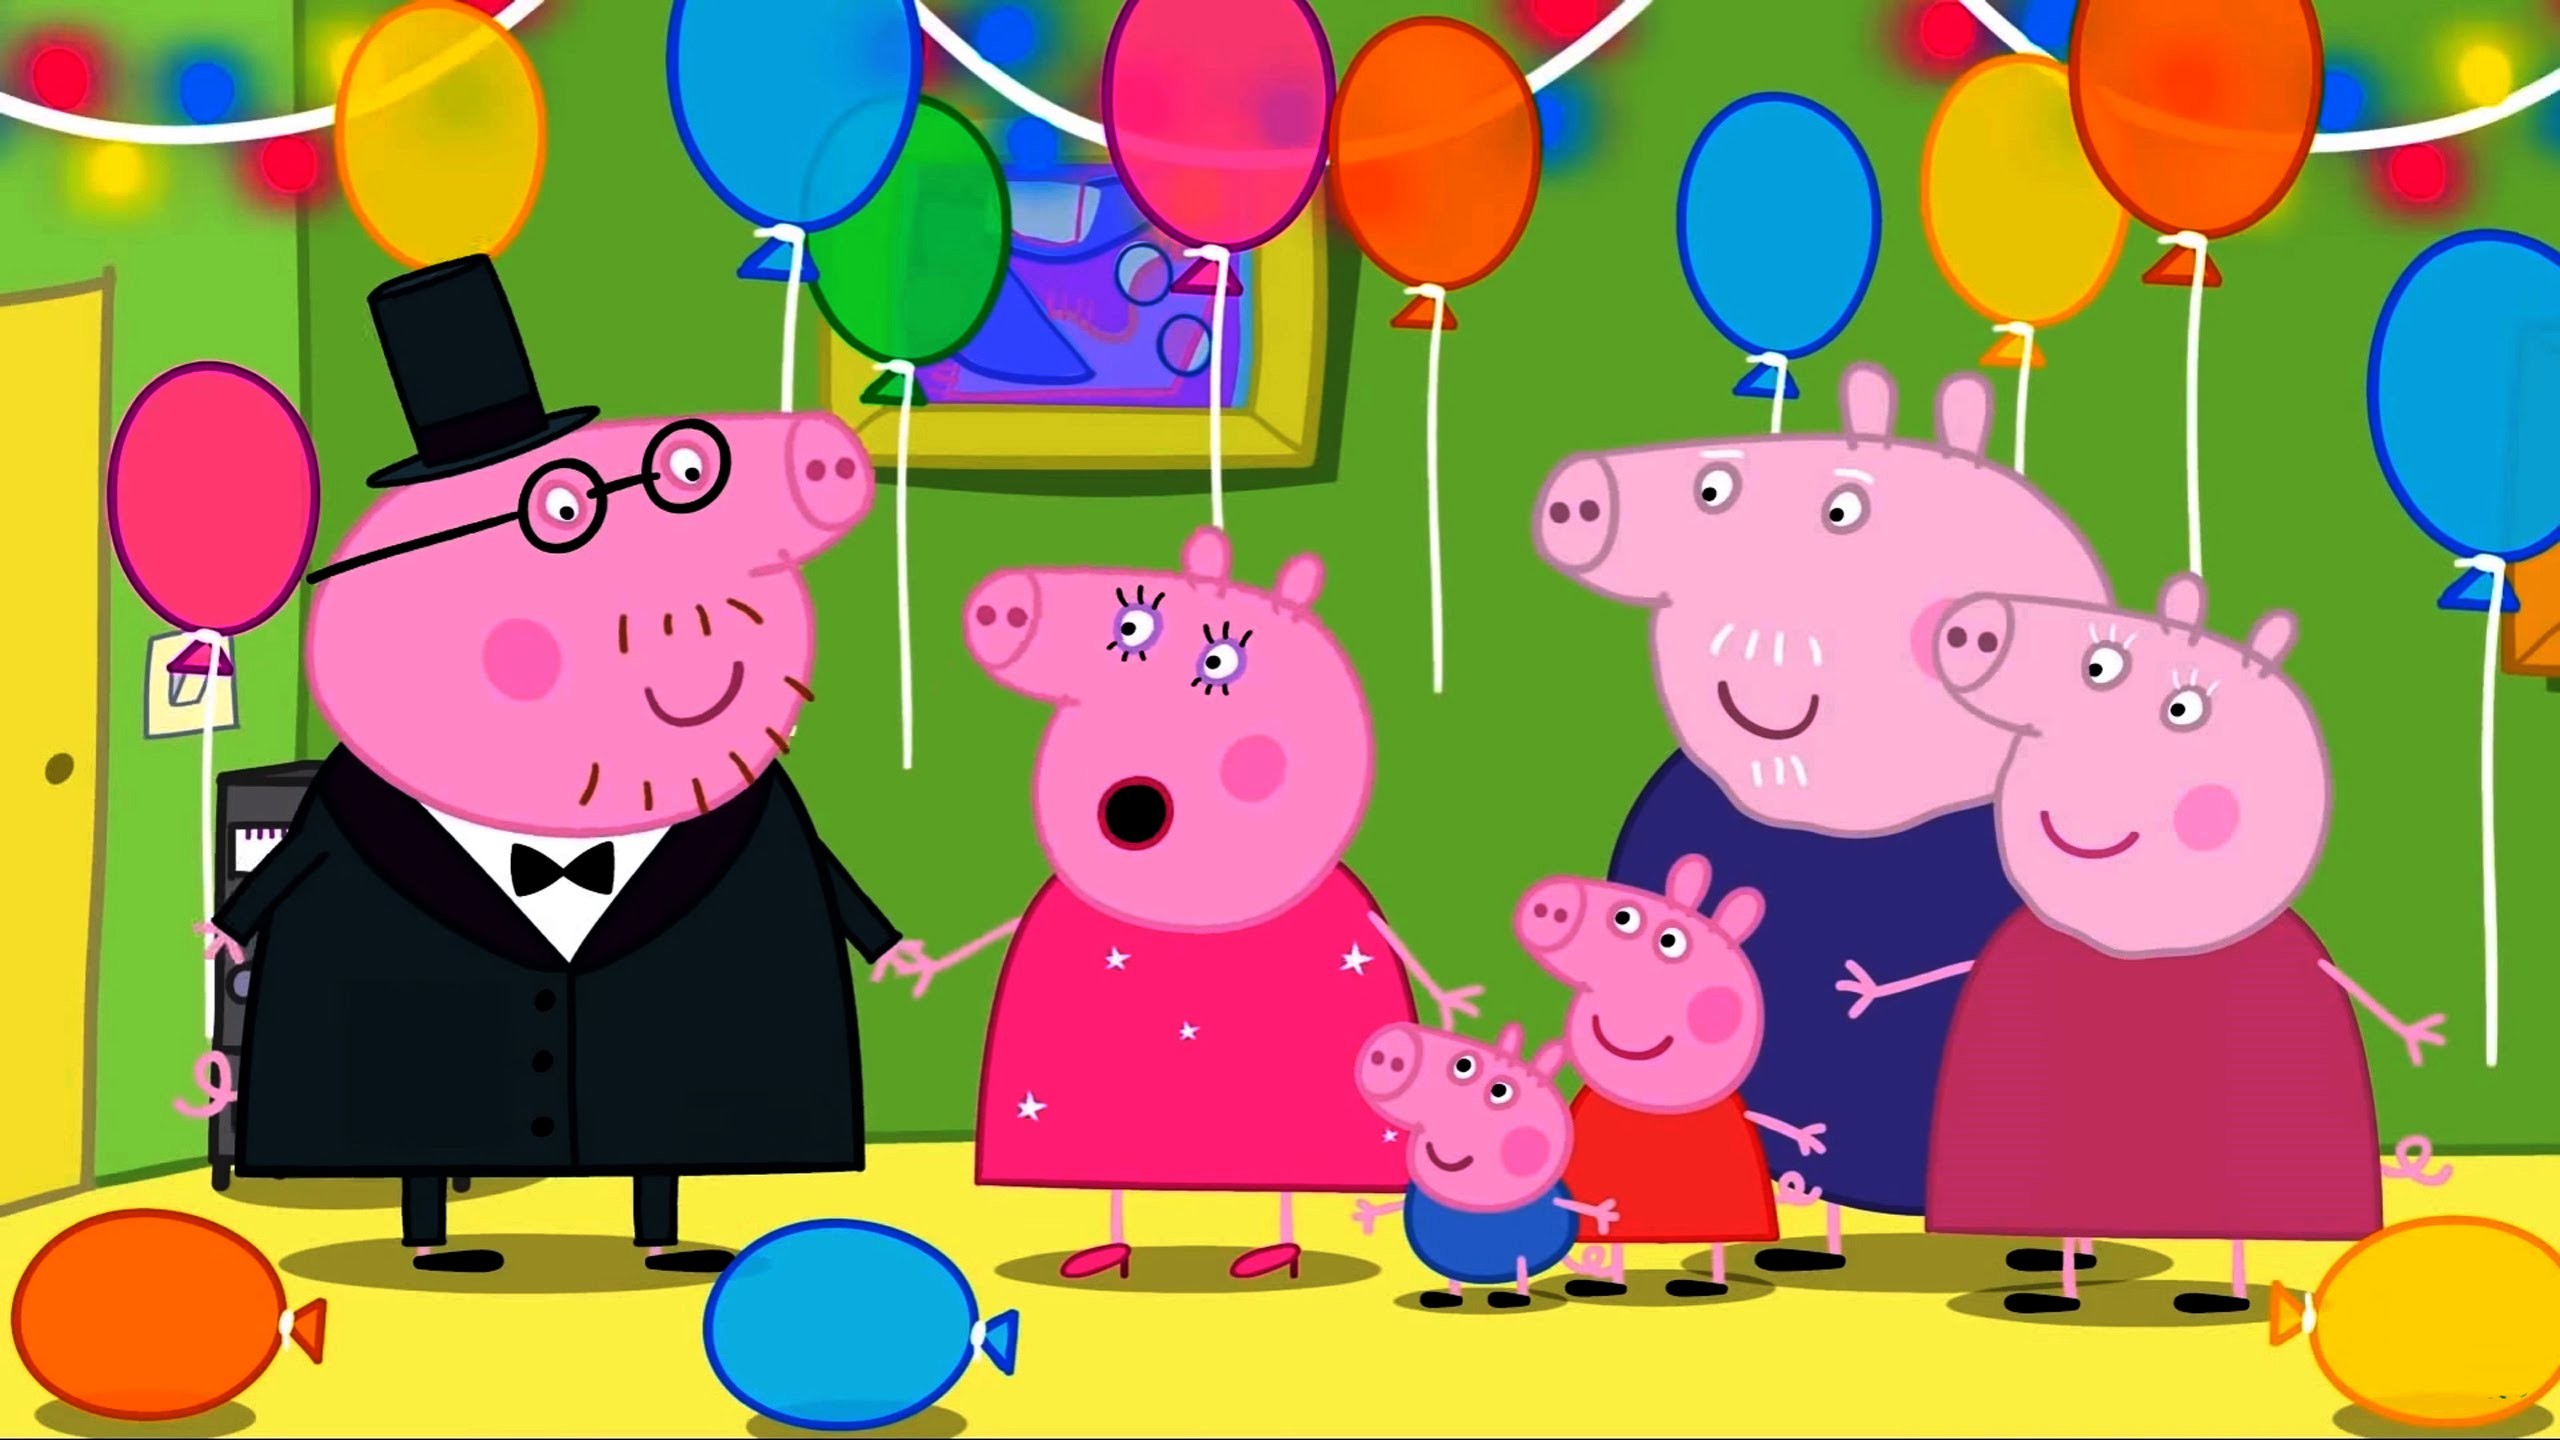 Peppa Pig Coloring Pages for Kids Peppa Pig Coloring Games Peppa Pig daddy pig mummy Birthday day – YouTube